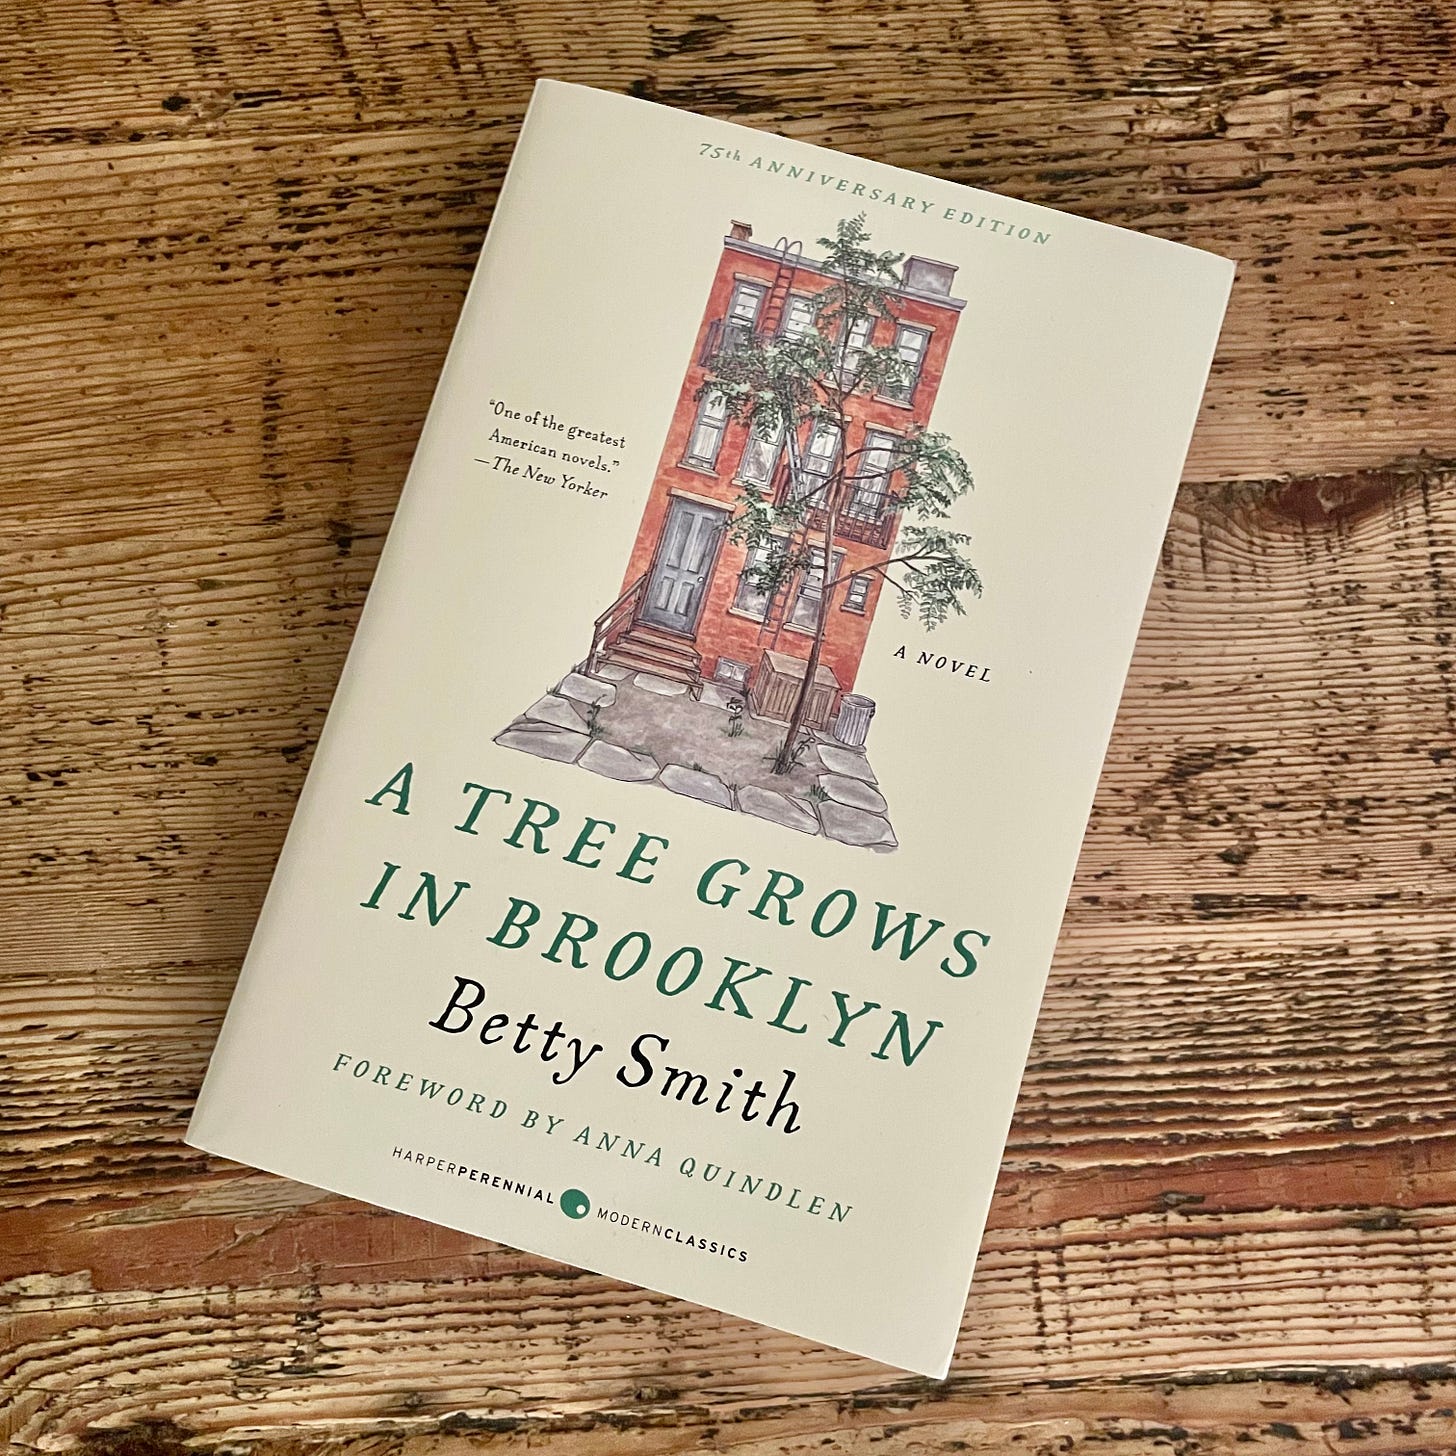 Betty Smith, A Tree Grows in Brooklyn, 75th Anniversary Edition